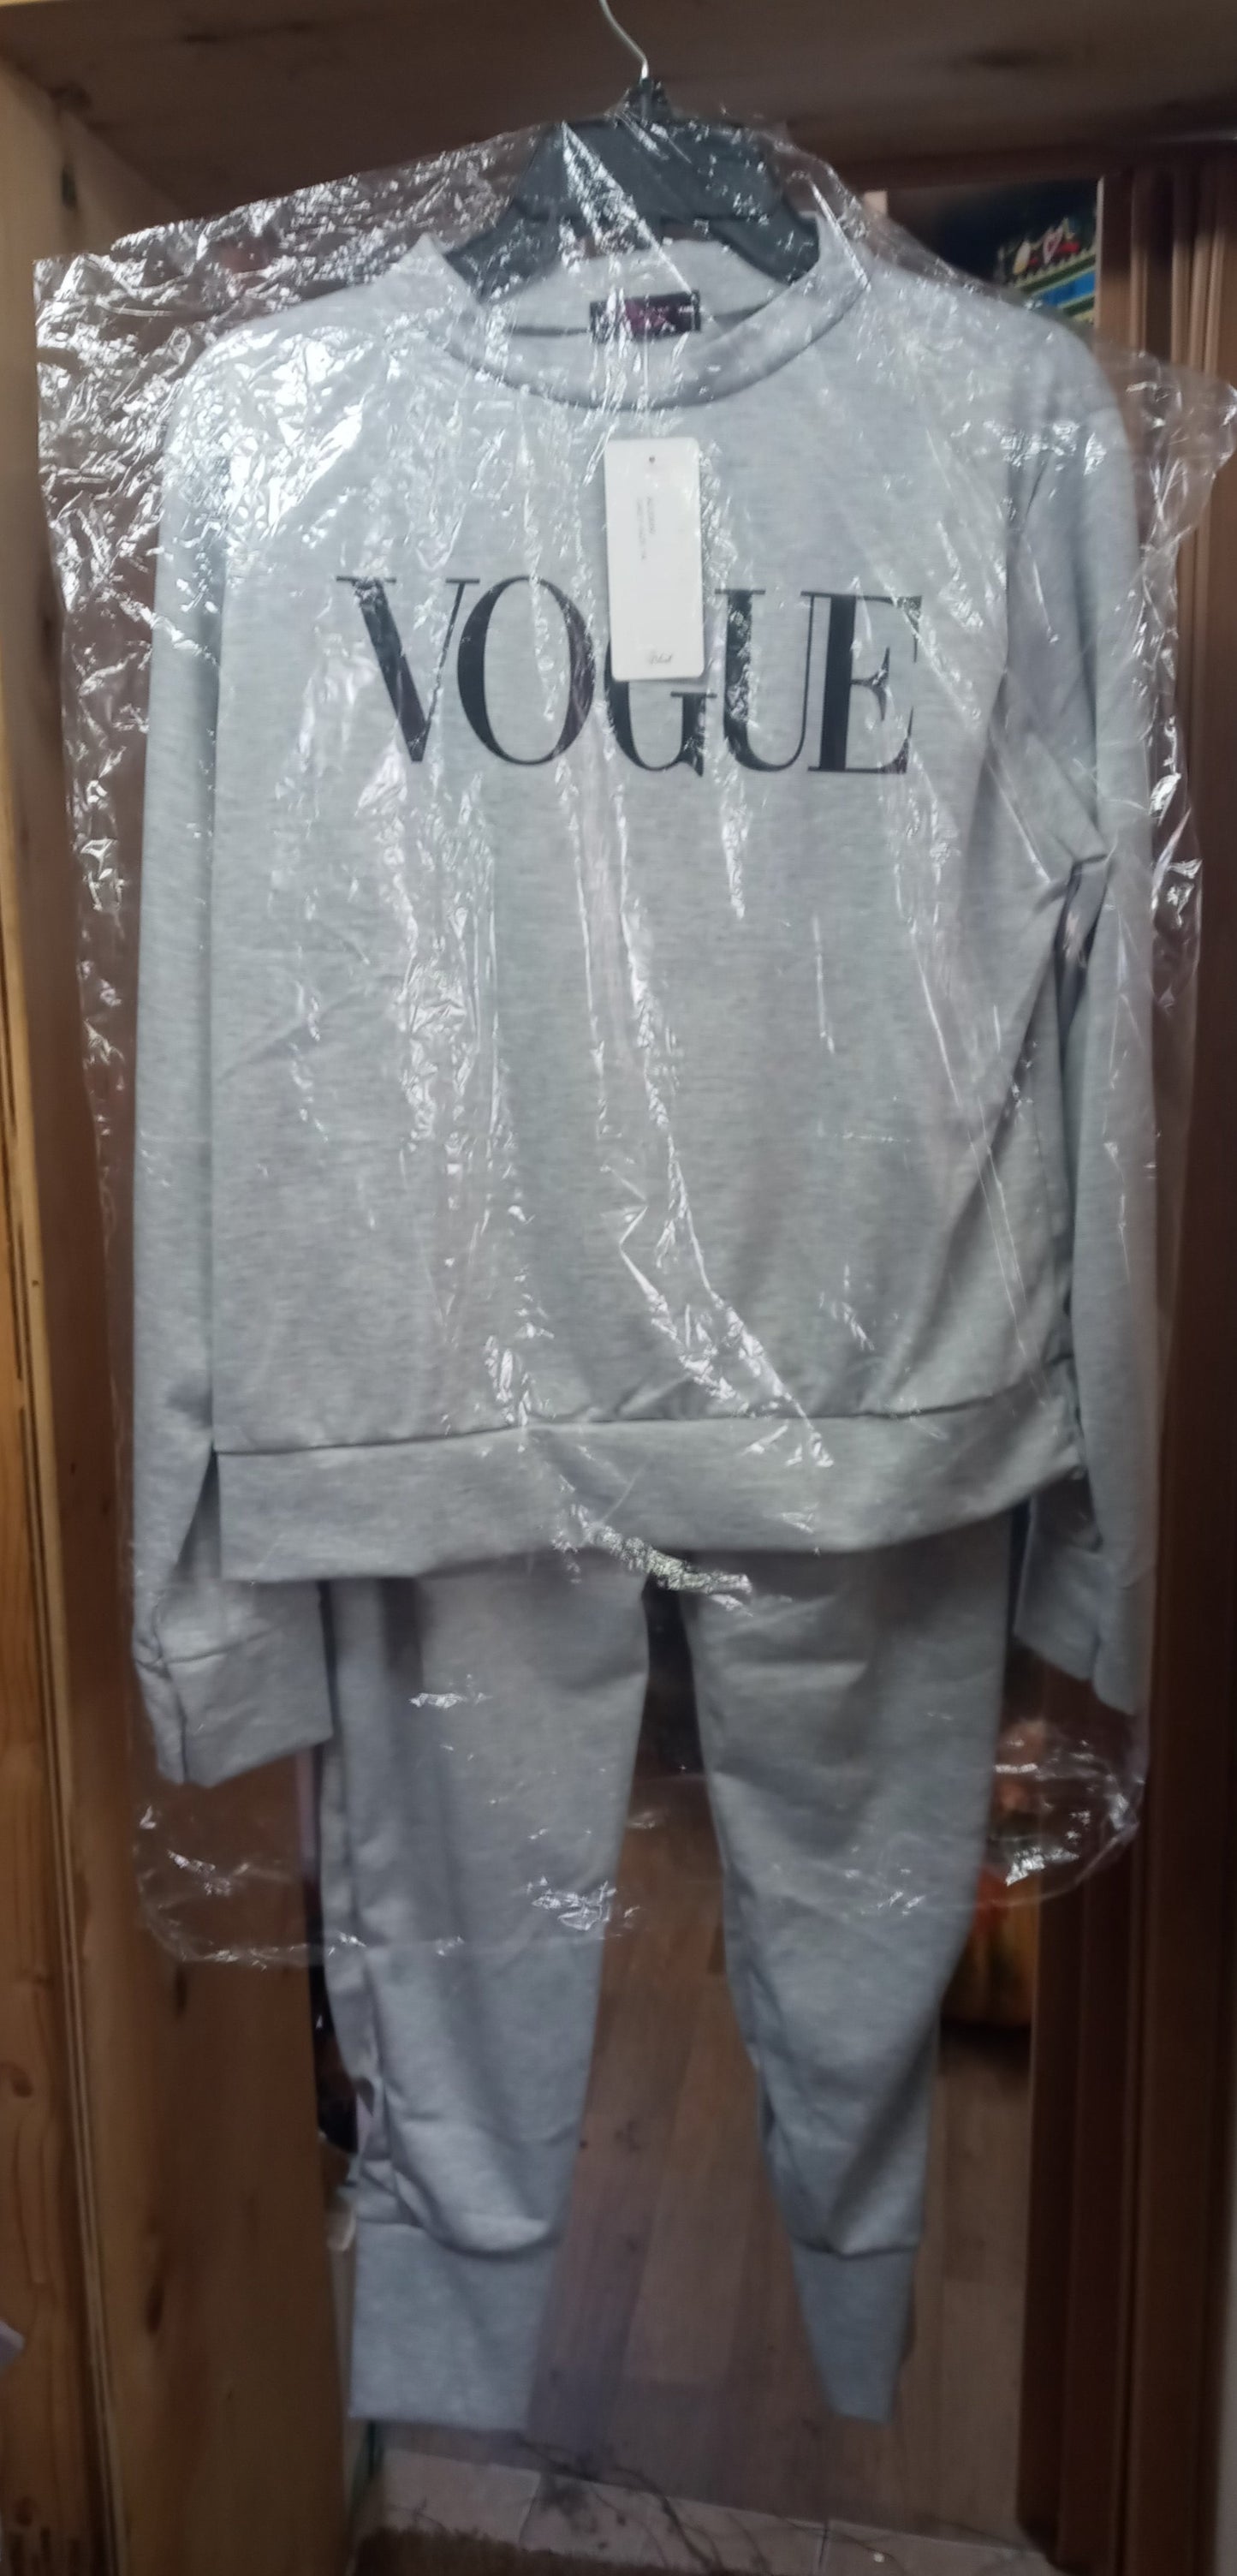 Woman 2 Piece Jogger Set By: Miss Blush Size 14 Color Gray/Blk Logo "Vogue" New Fall Arrival